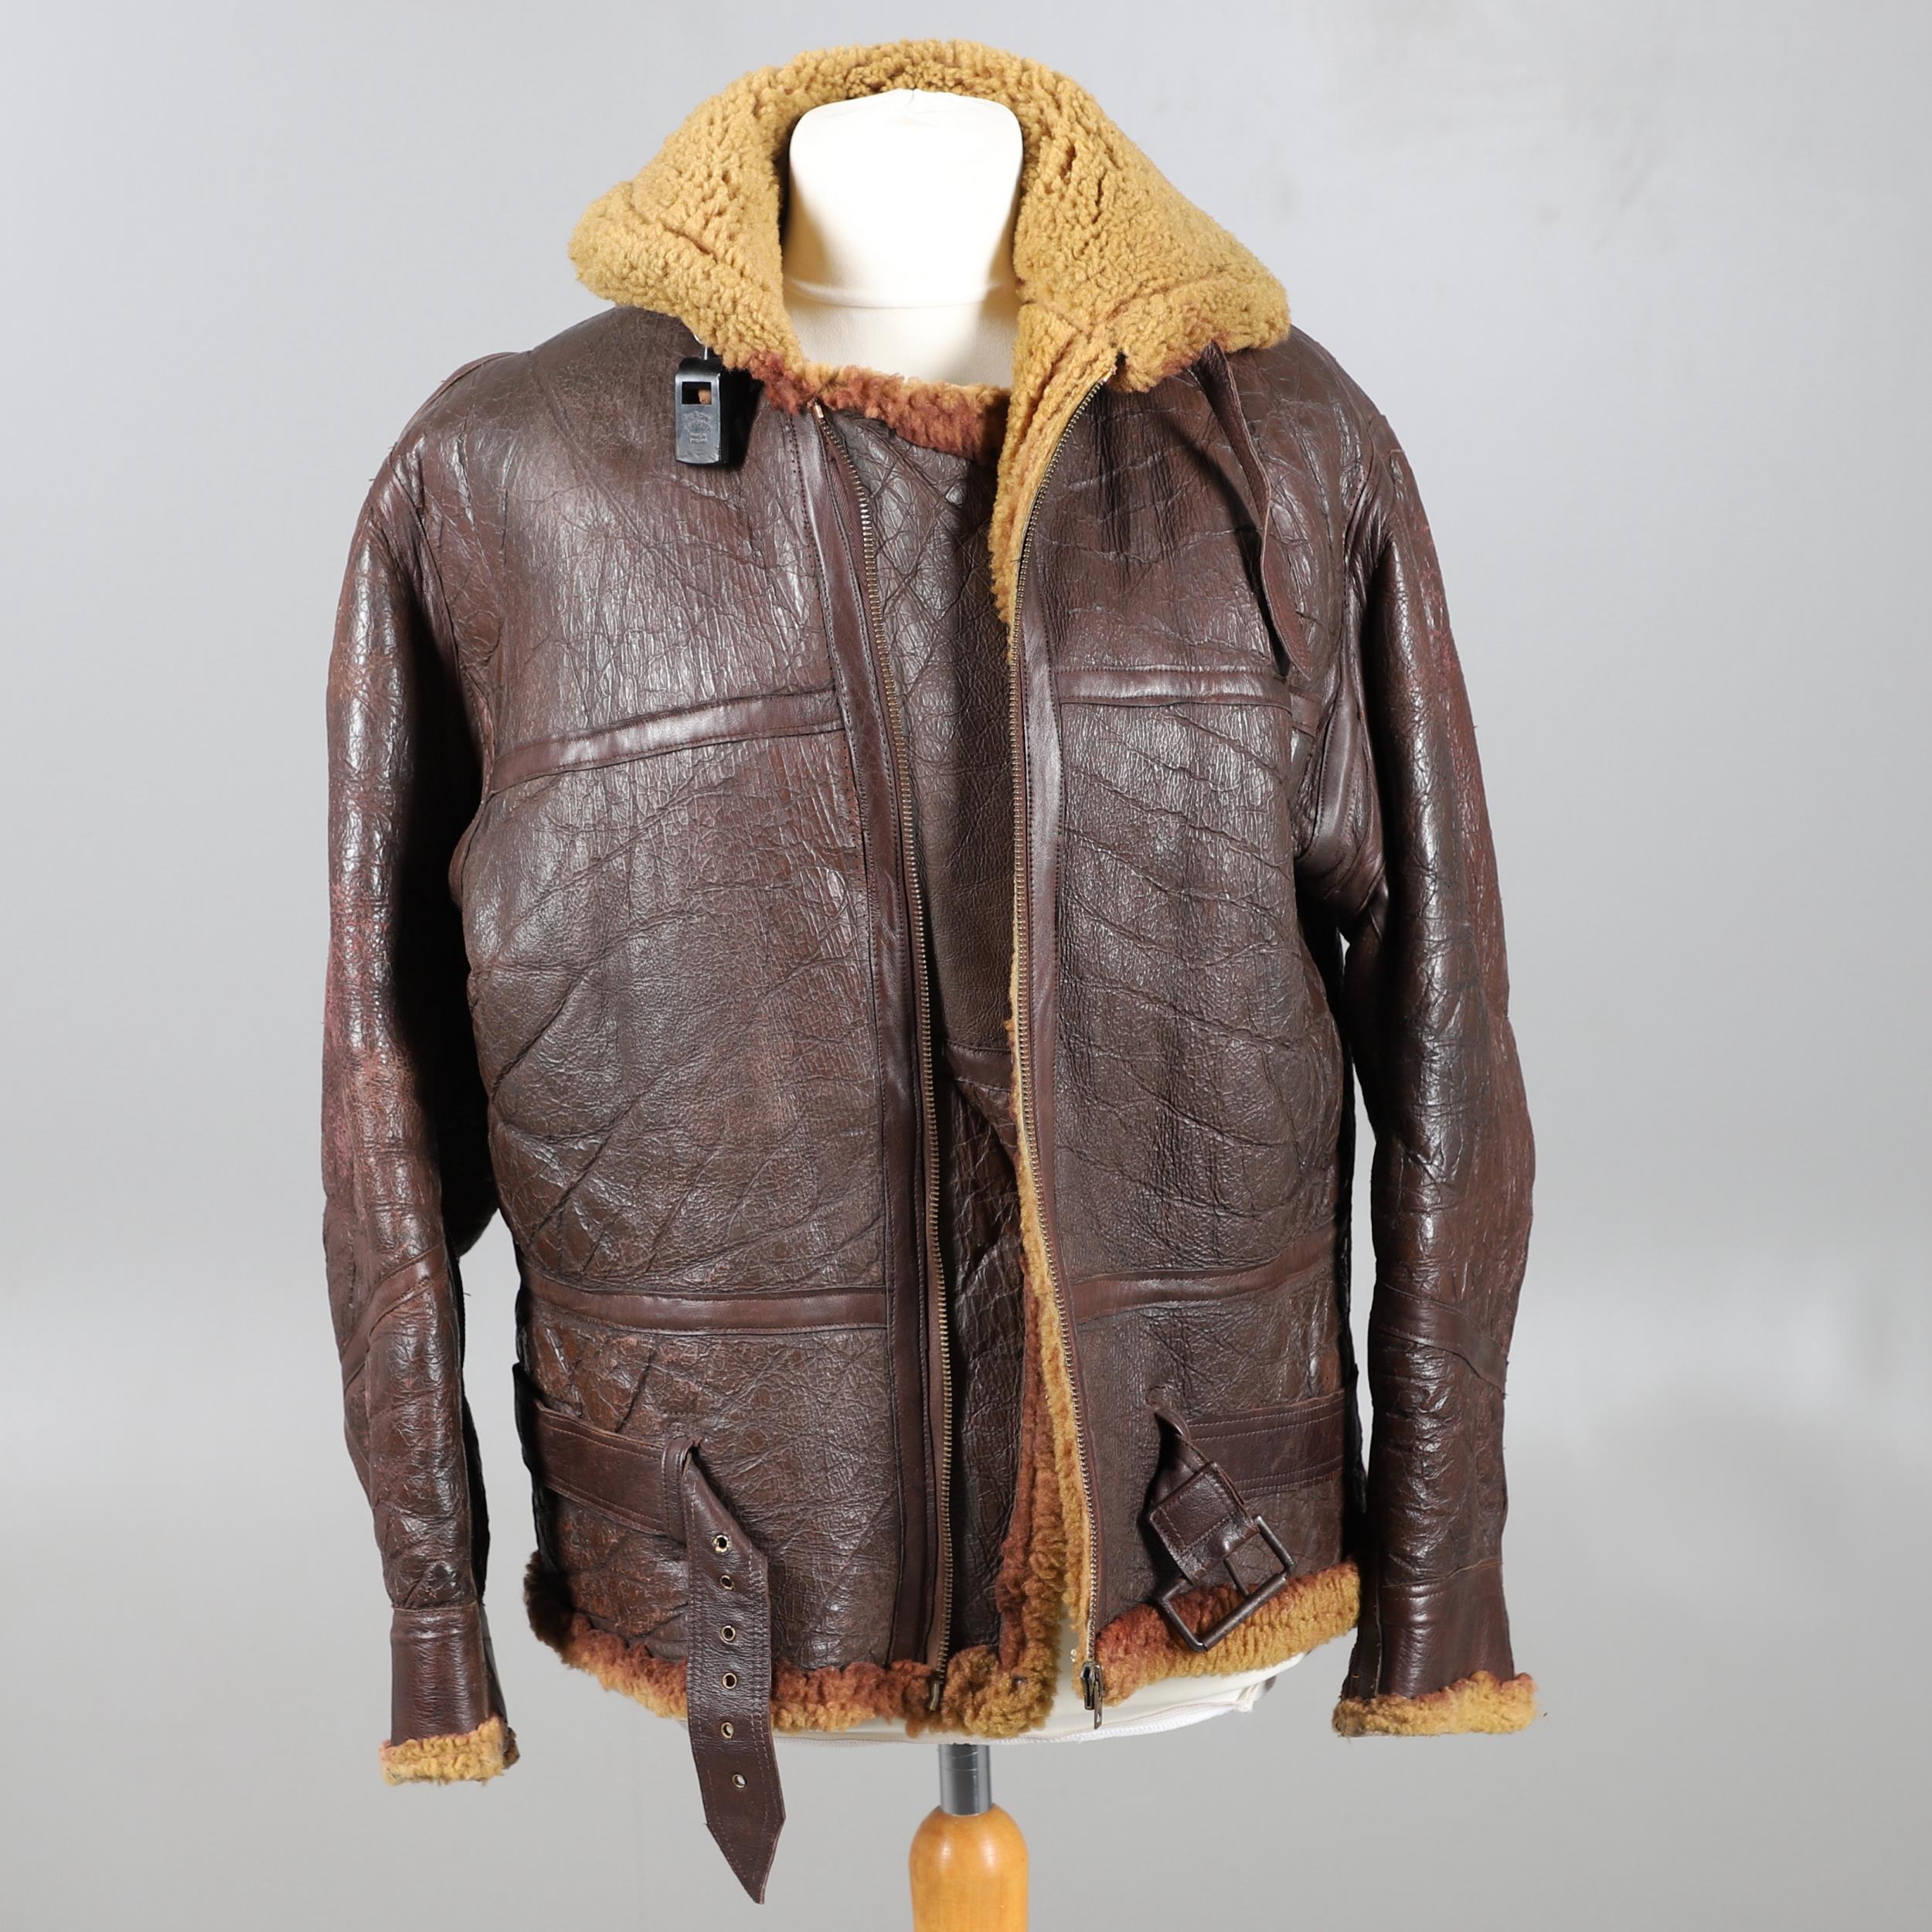 A SECOND WORLD WAR OR LATER LEATHER FLYING JACKET.